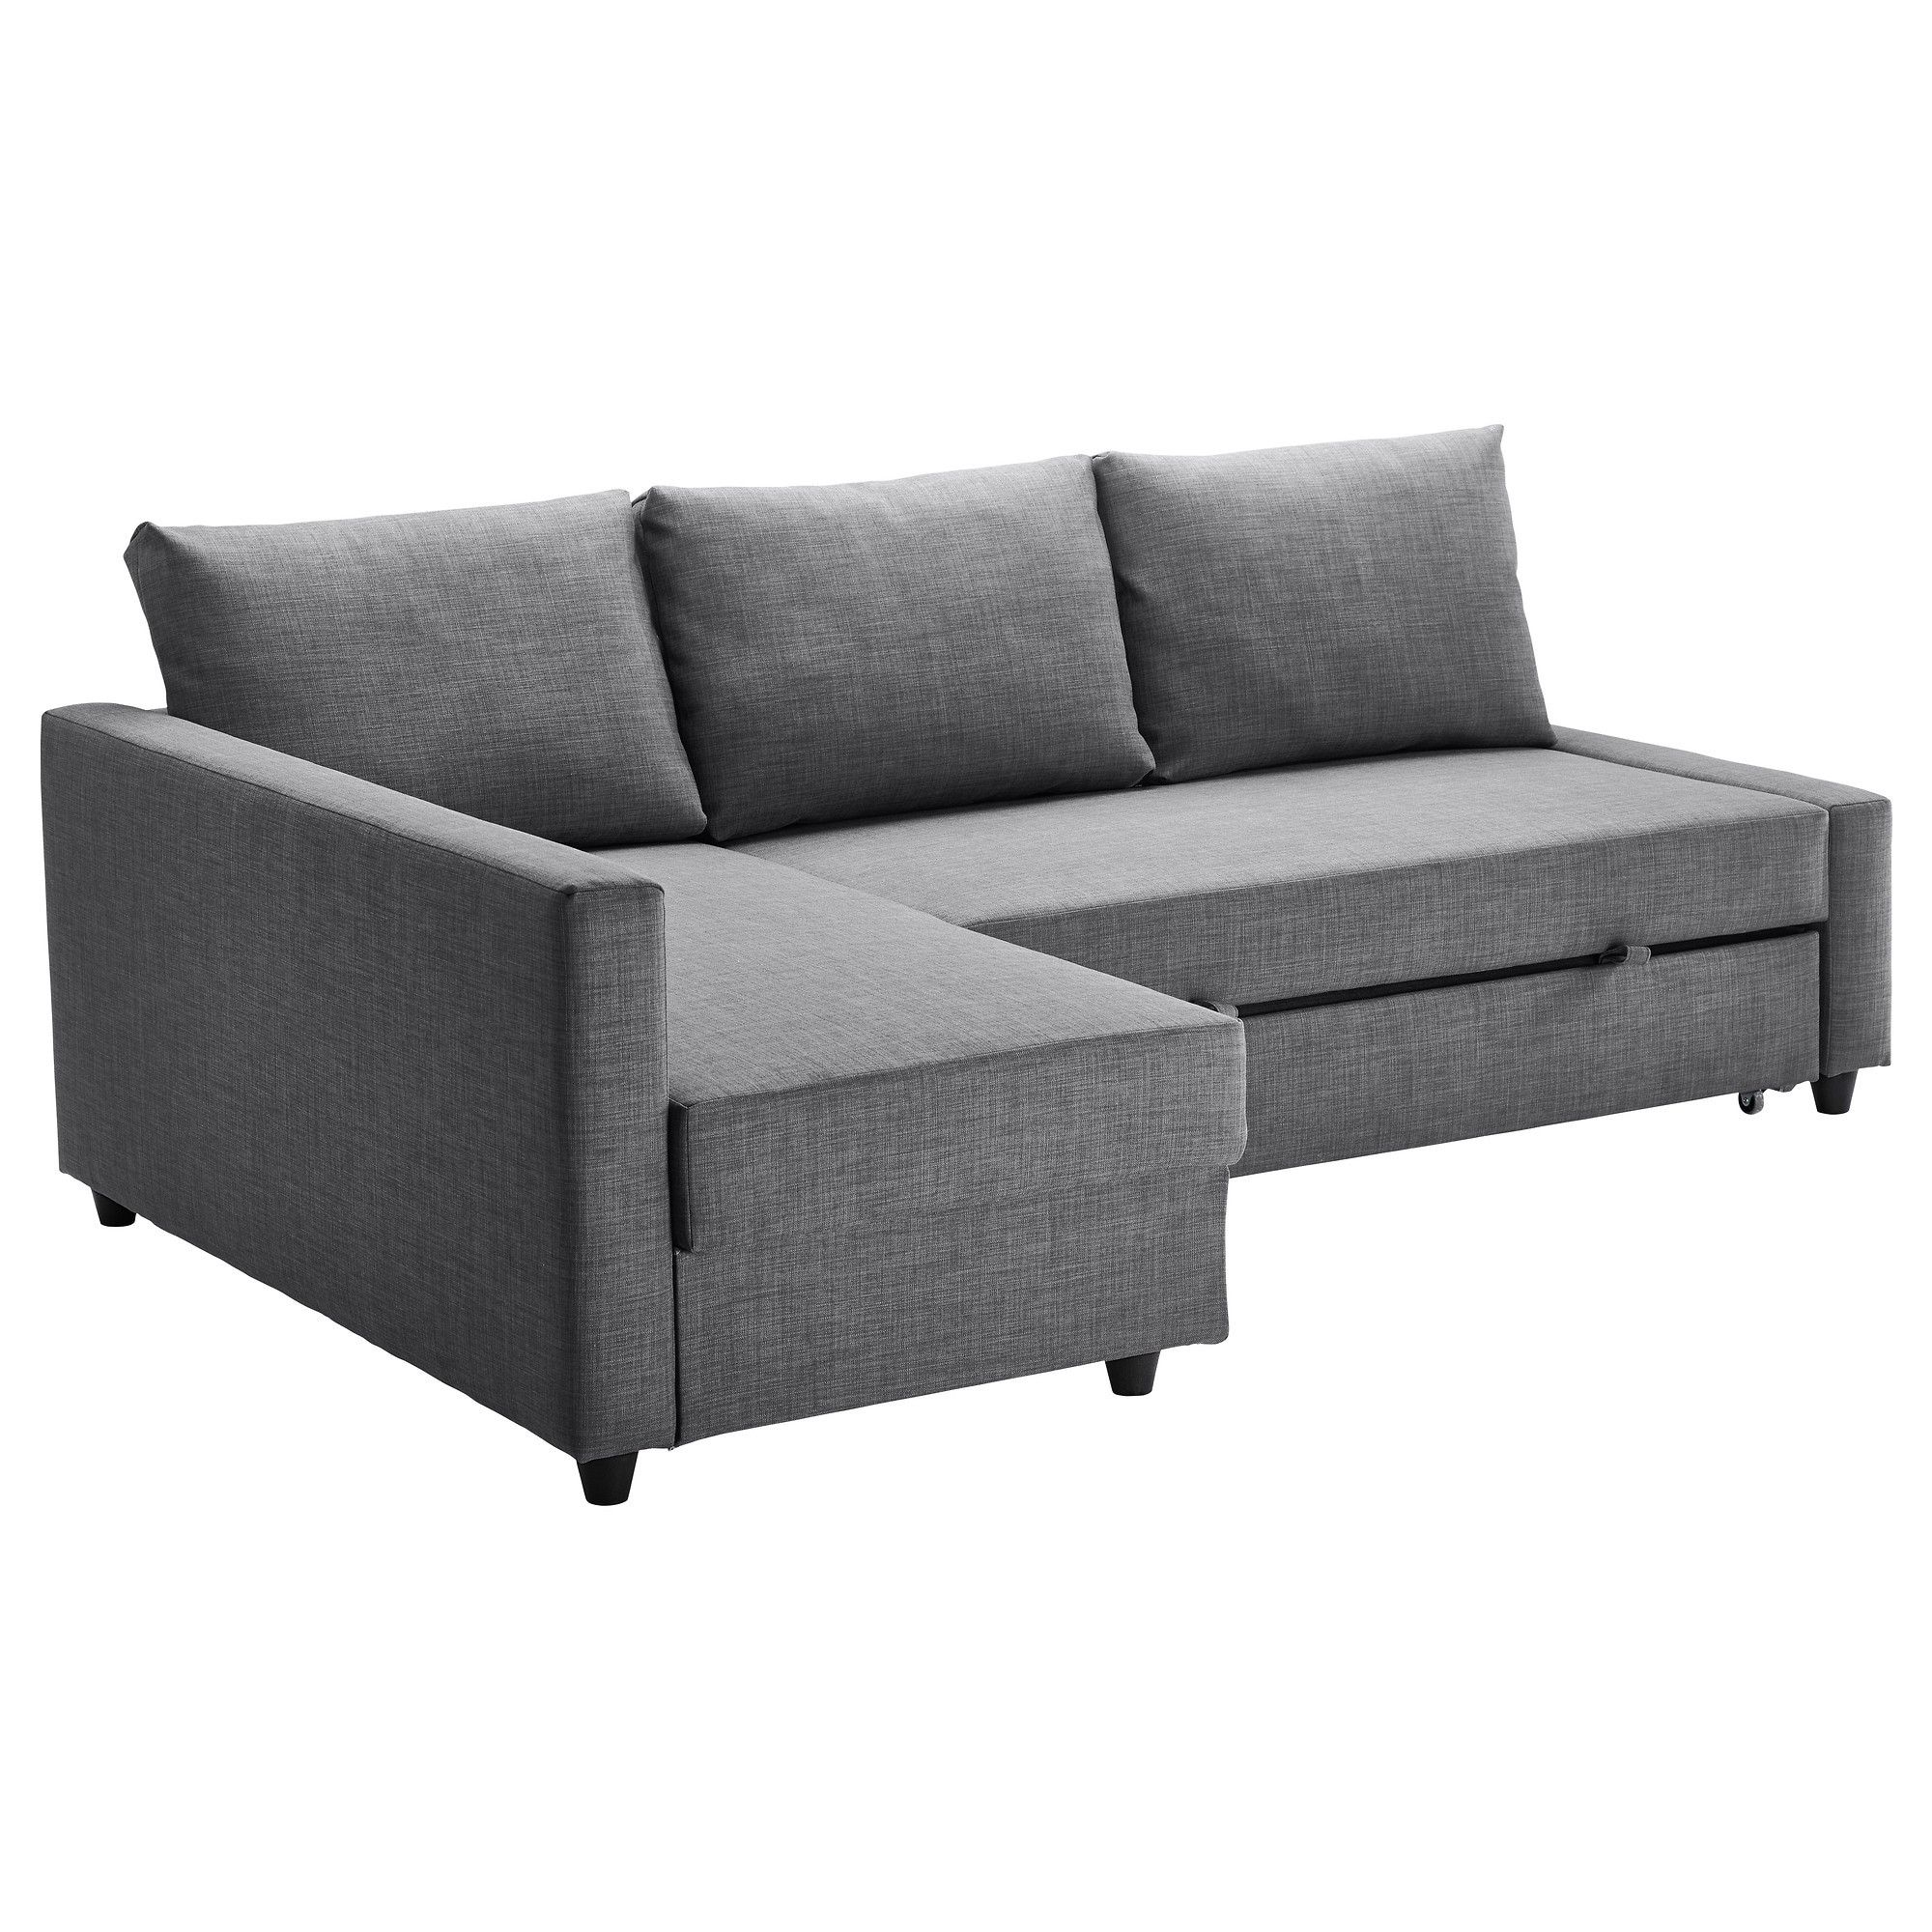 Taren Reversible Sofa/chaise Sleeper Sectionals With Storage Ottoman With Regard To Current Best Of Sleeper Chaise Sofa – Buildsimplehome (Gallery 12 of 20)